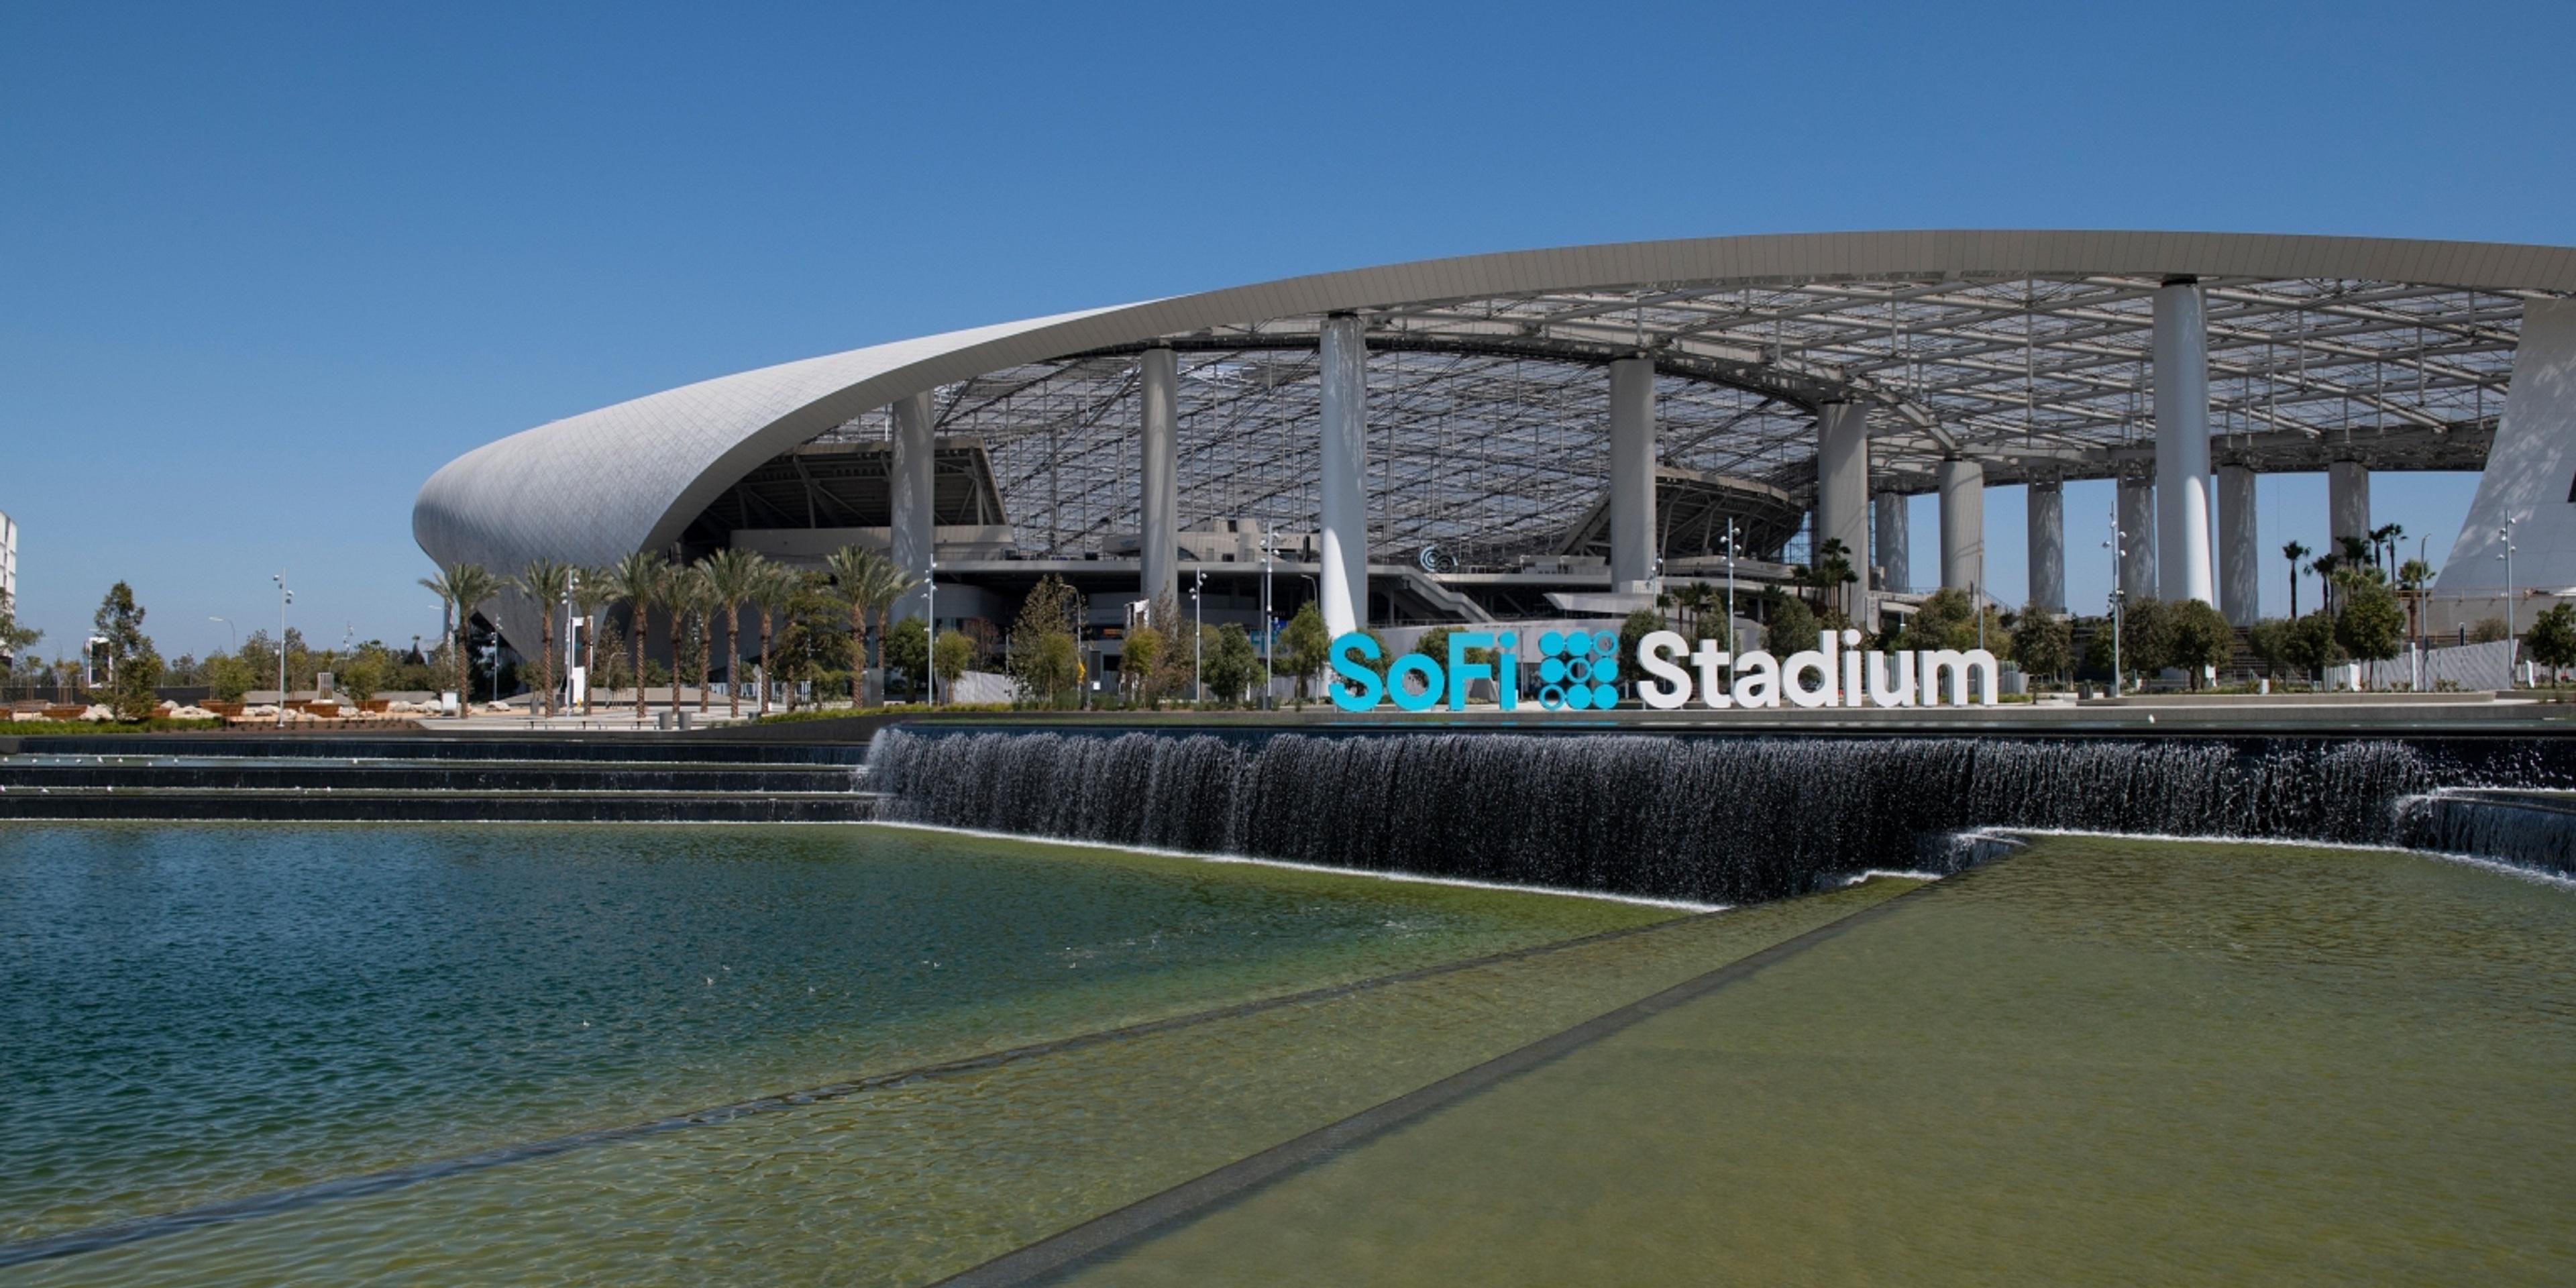 15 miles away from SoFi stadium, a new entertainment complex and home of the LA Rams and LA Chargers. Scheduled to host Super Bowl LVI, WrestleMania 39 and 2028 Summer Olympics.